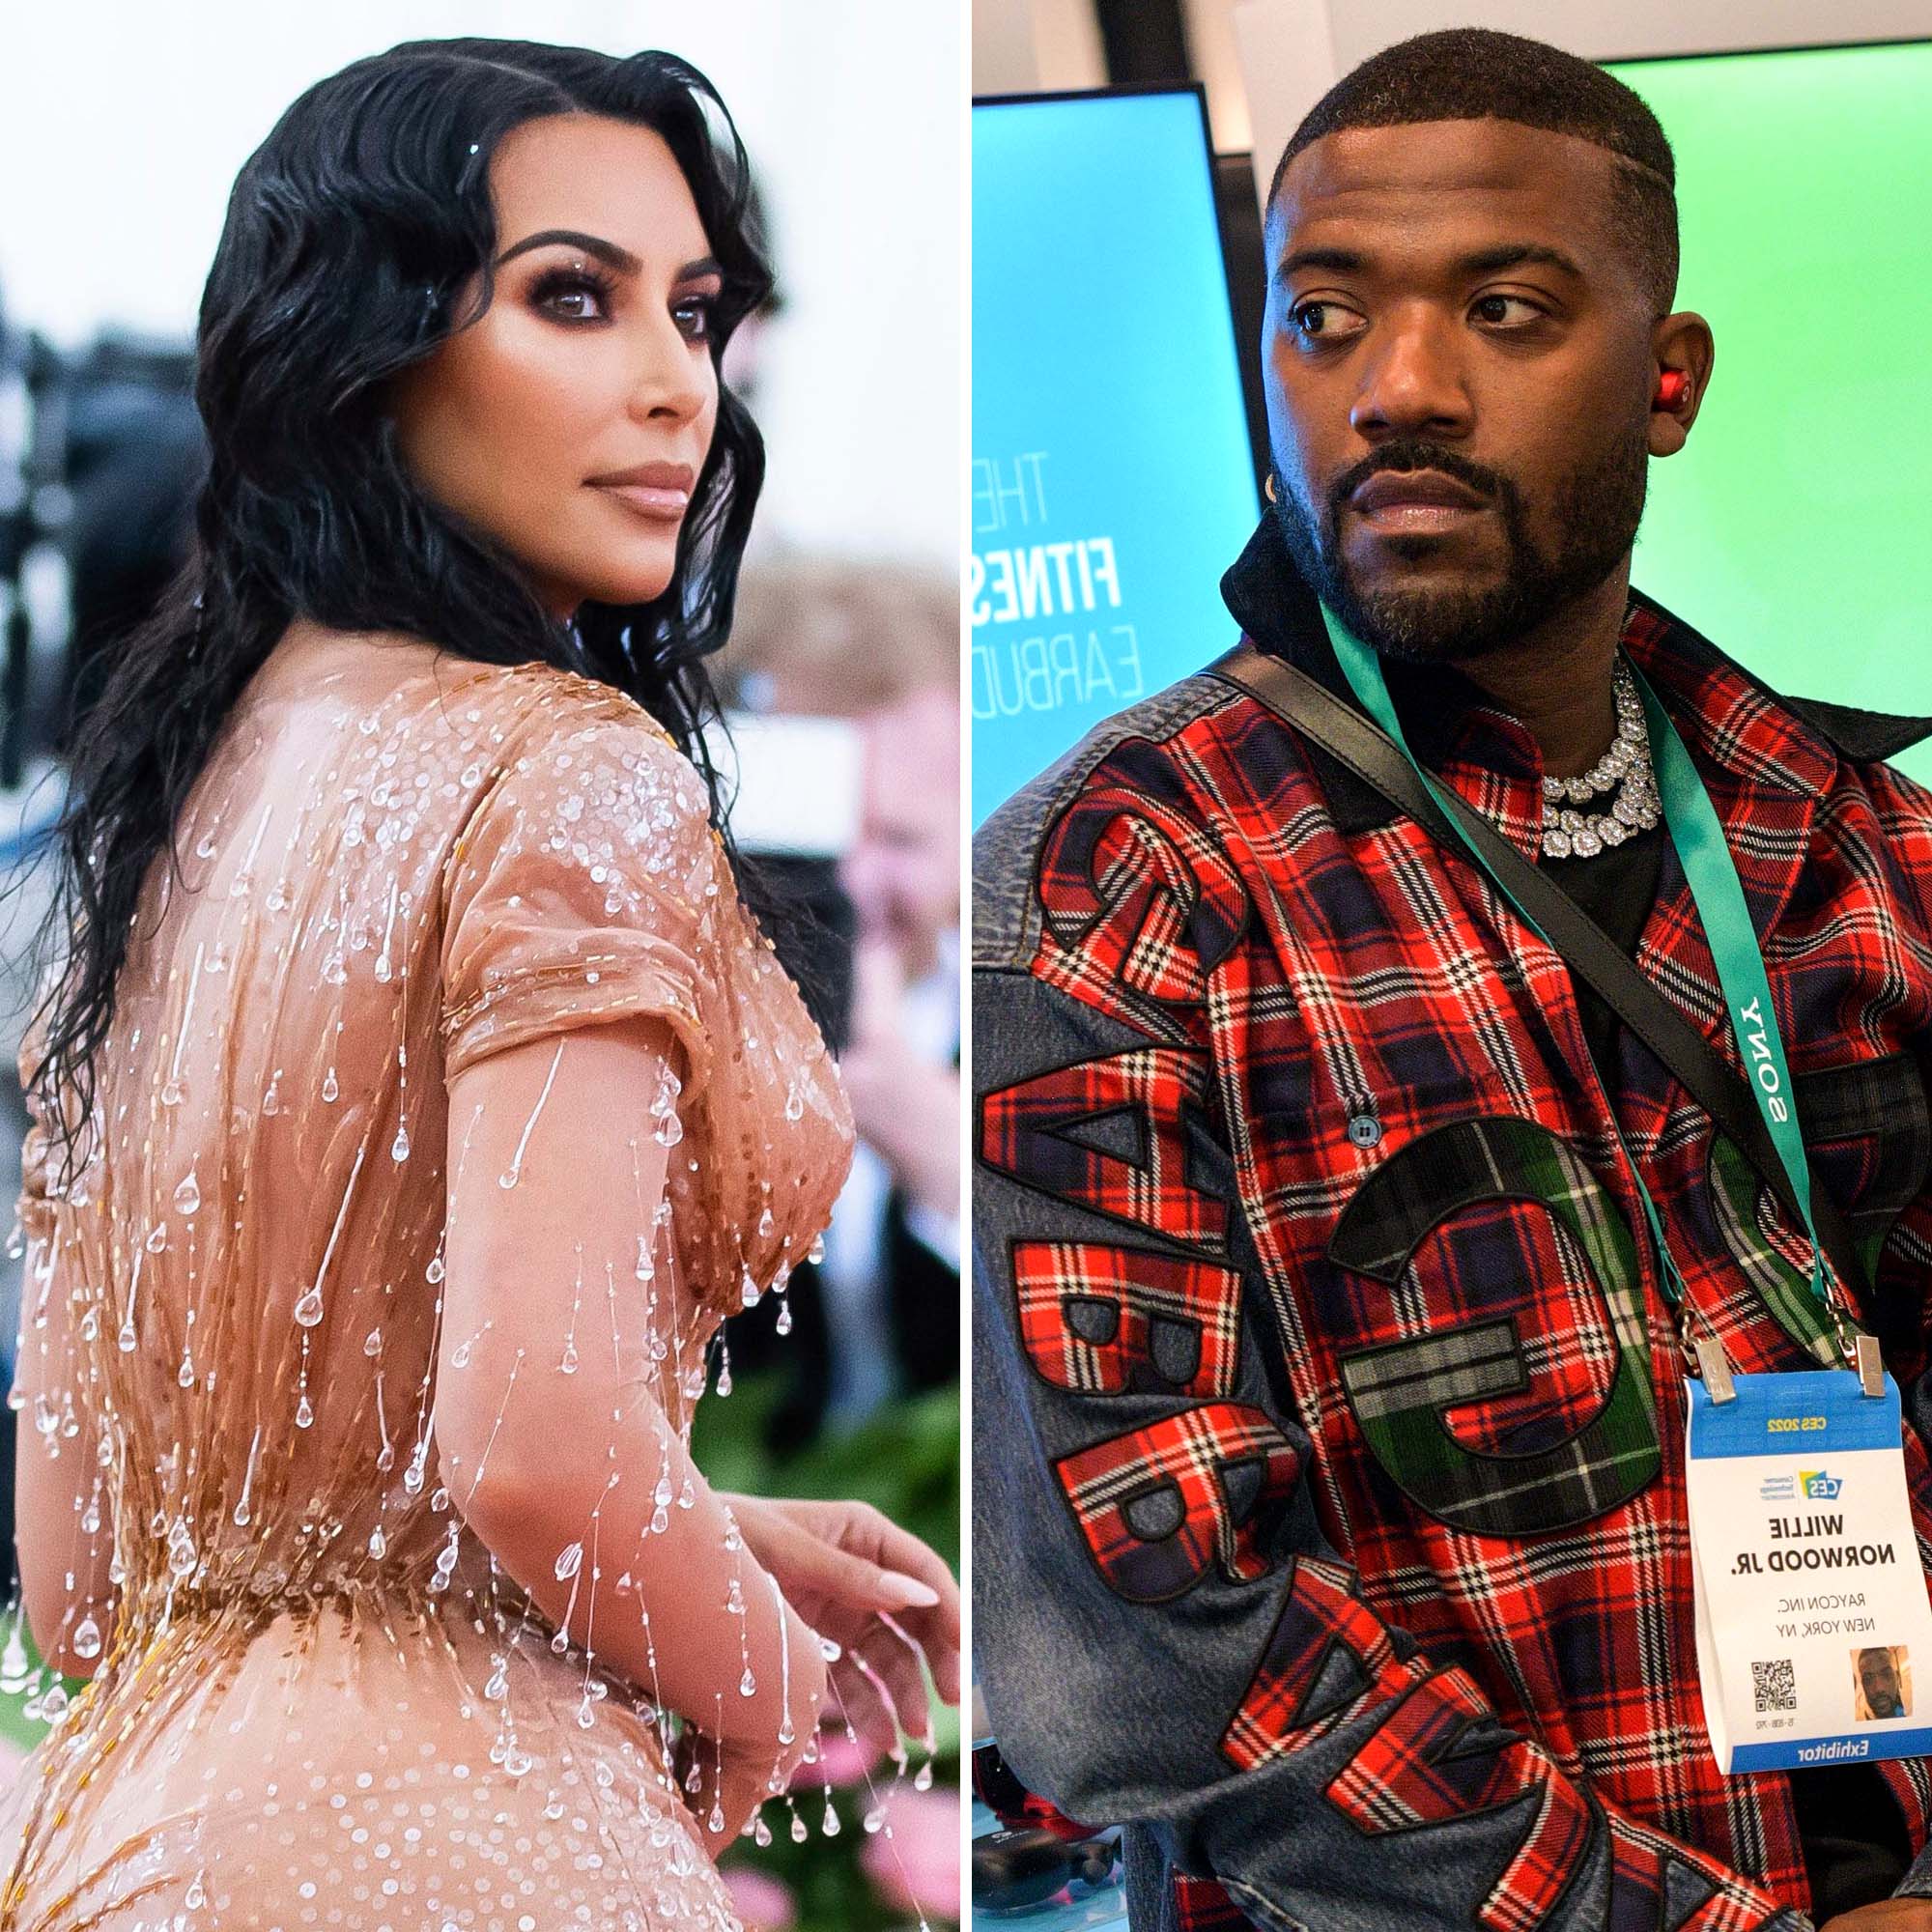 christy andrade recommends ray j sex videos pic